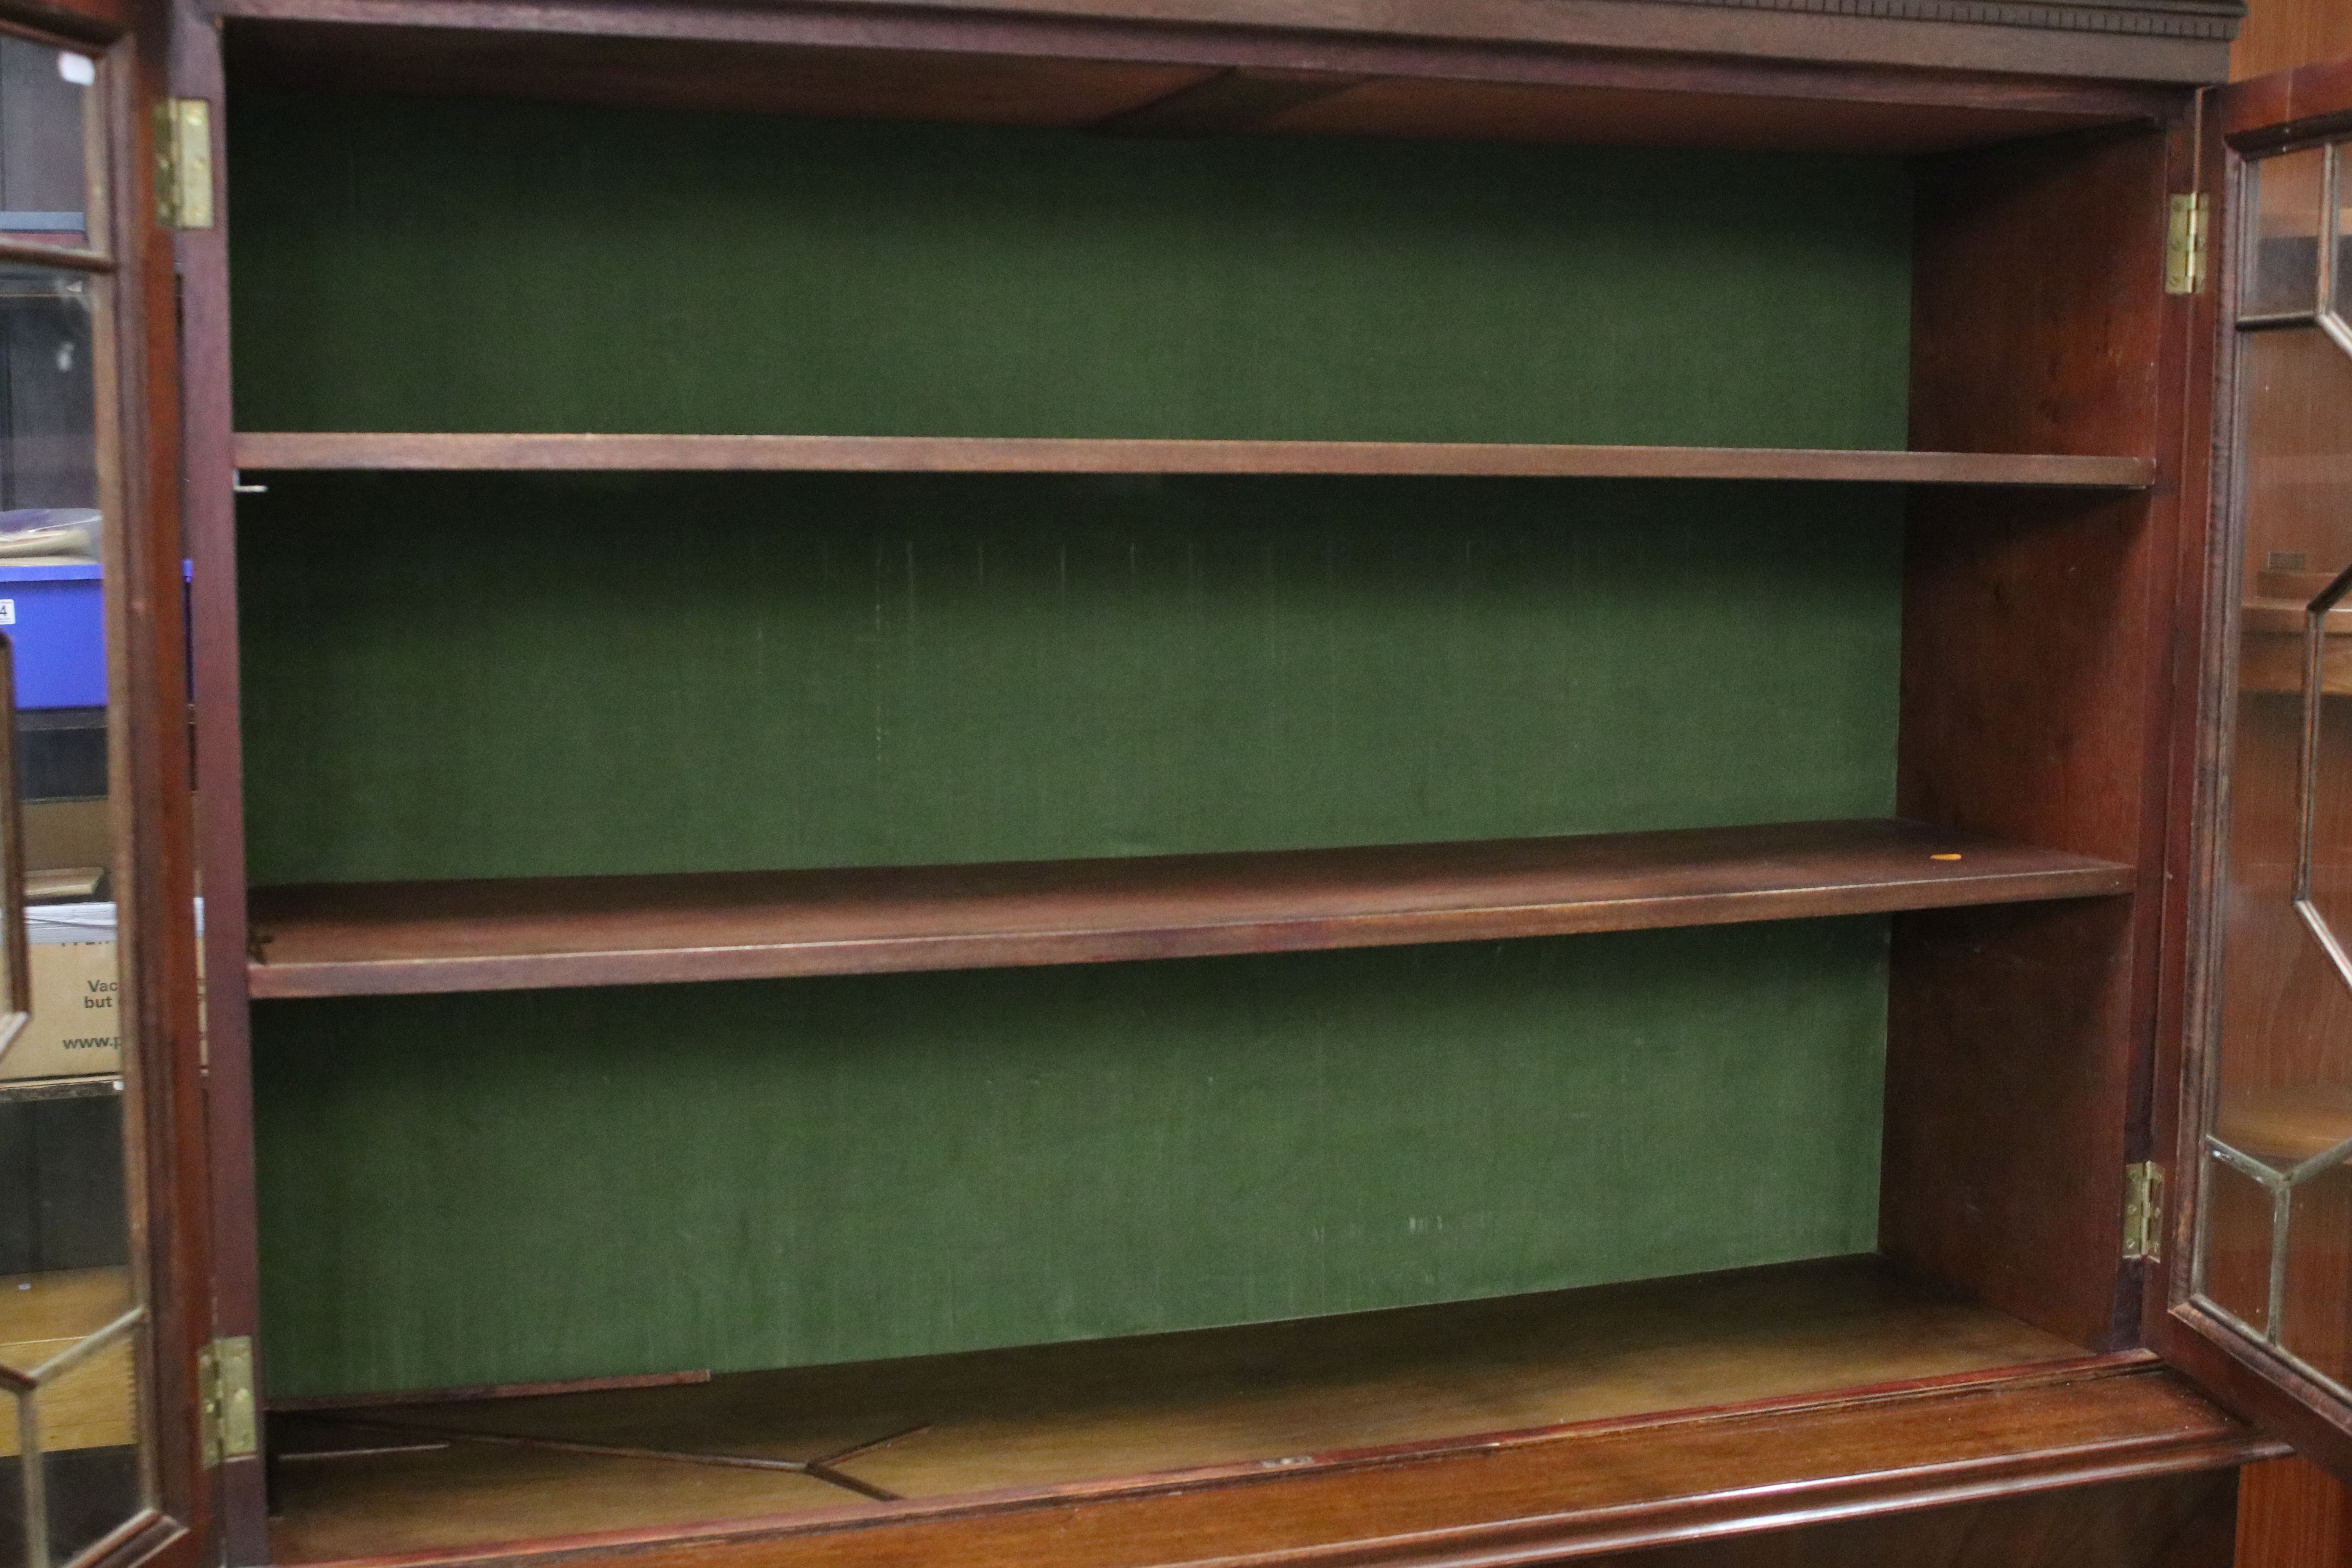 Early 20th century mahogany breakfront bookcase, the upper section with dentil moulding above - Image 4 of 12